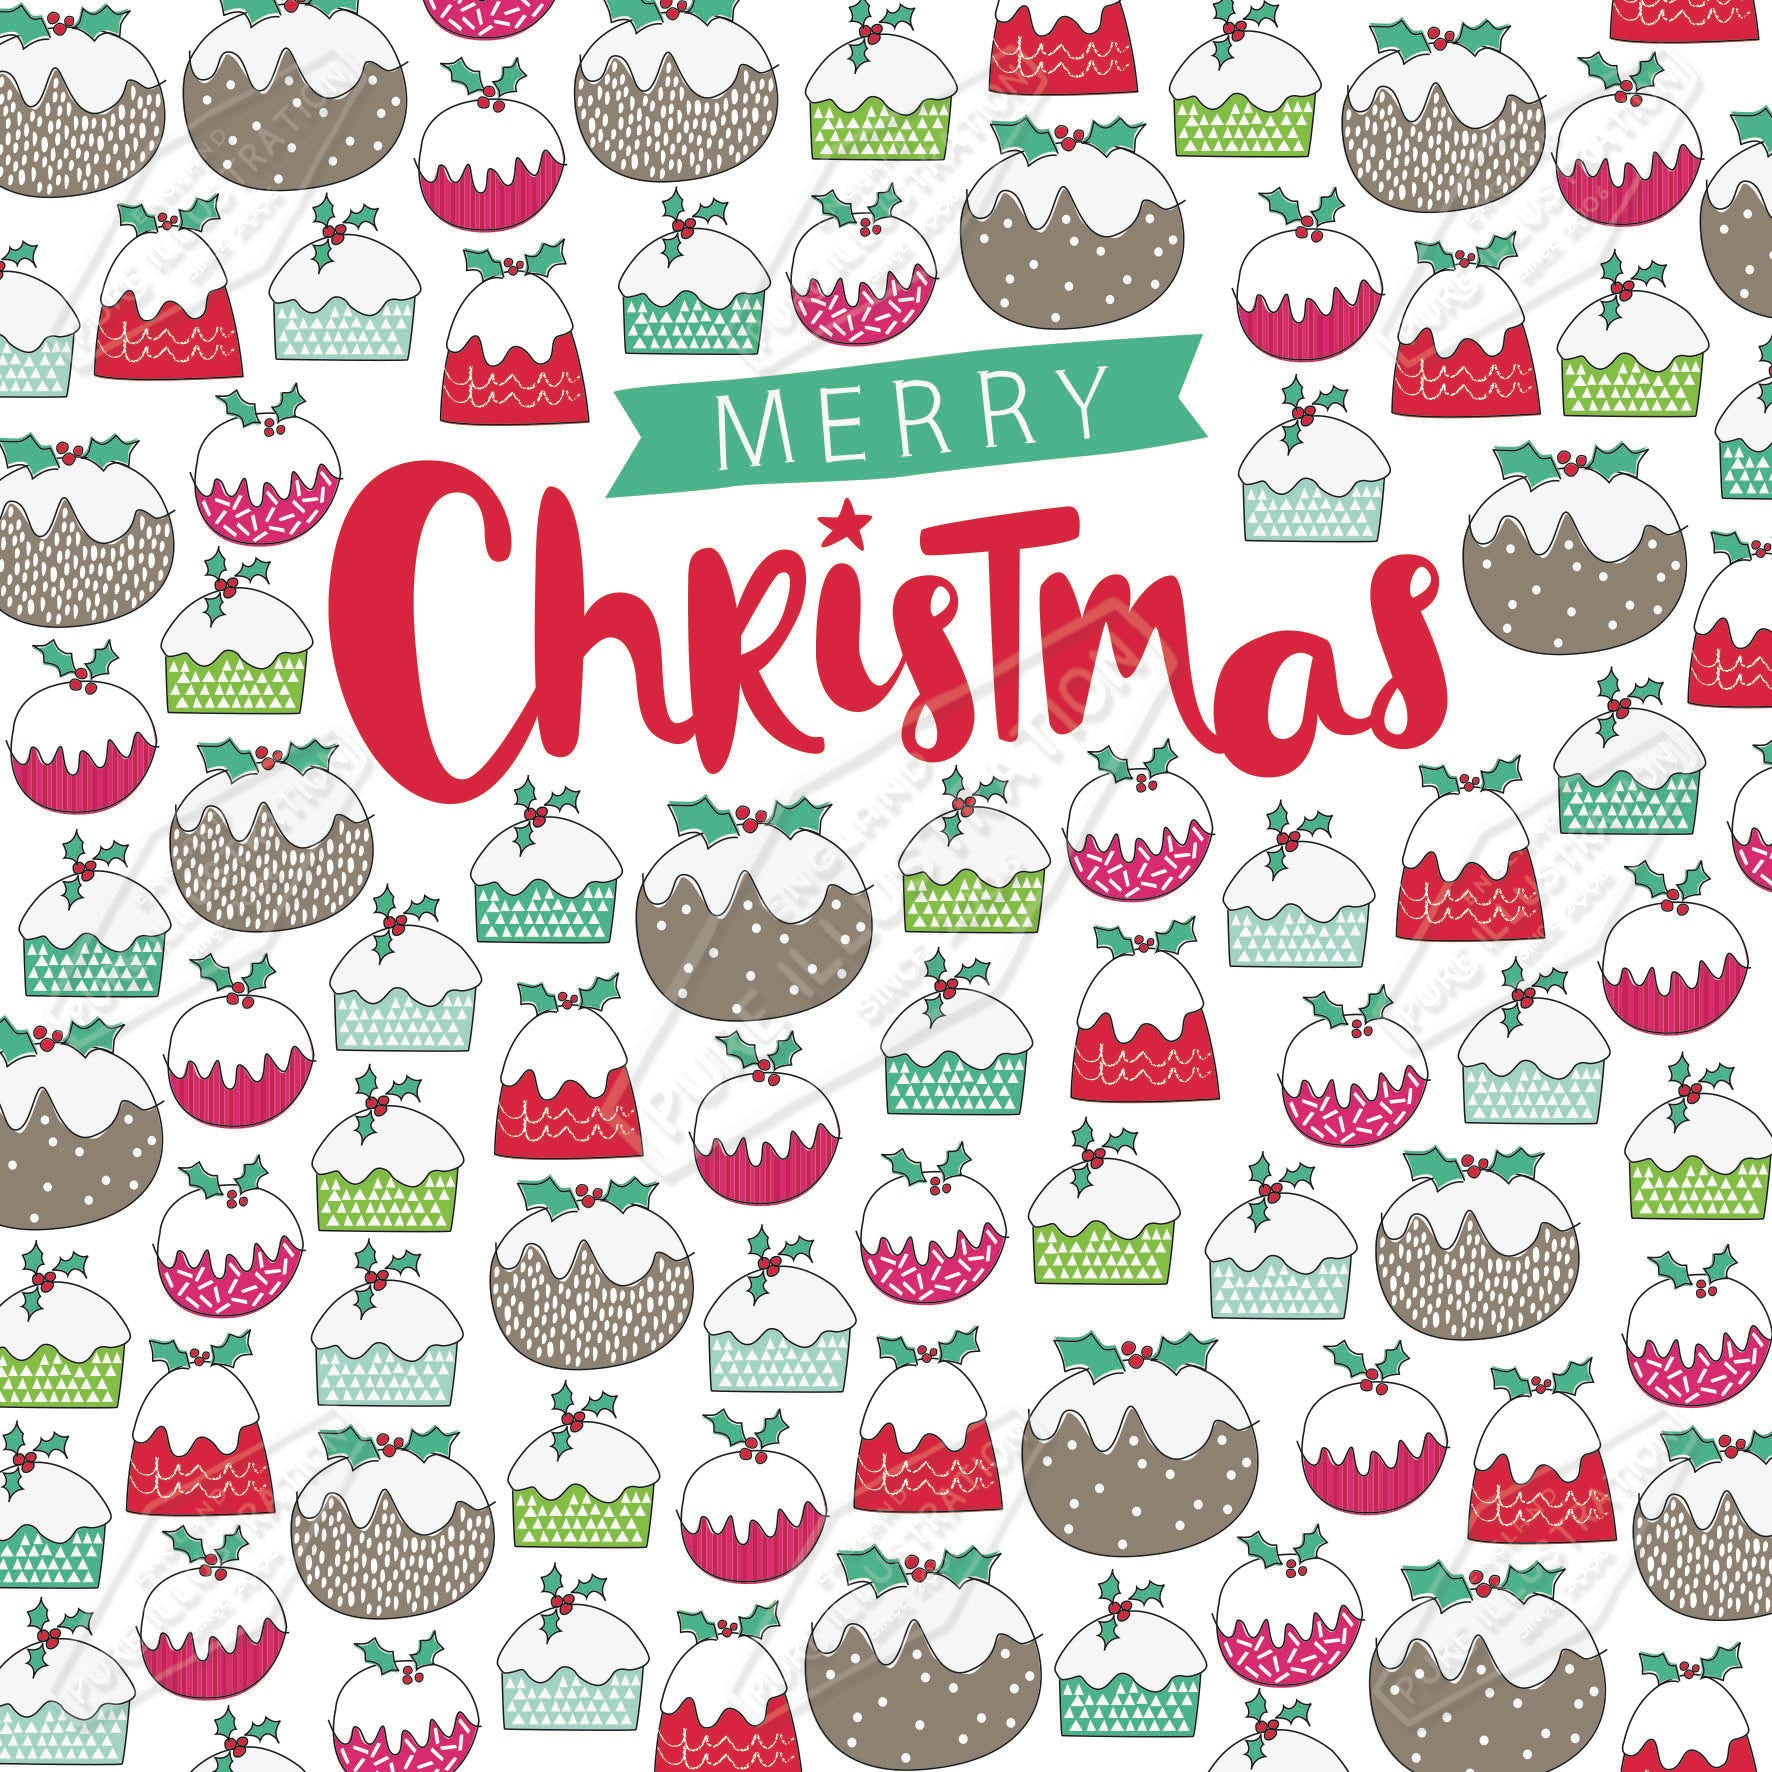 00035435IMC- Isla McDonald is represented by Pure Art Licensing Agency - Christmas Pattern Design